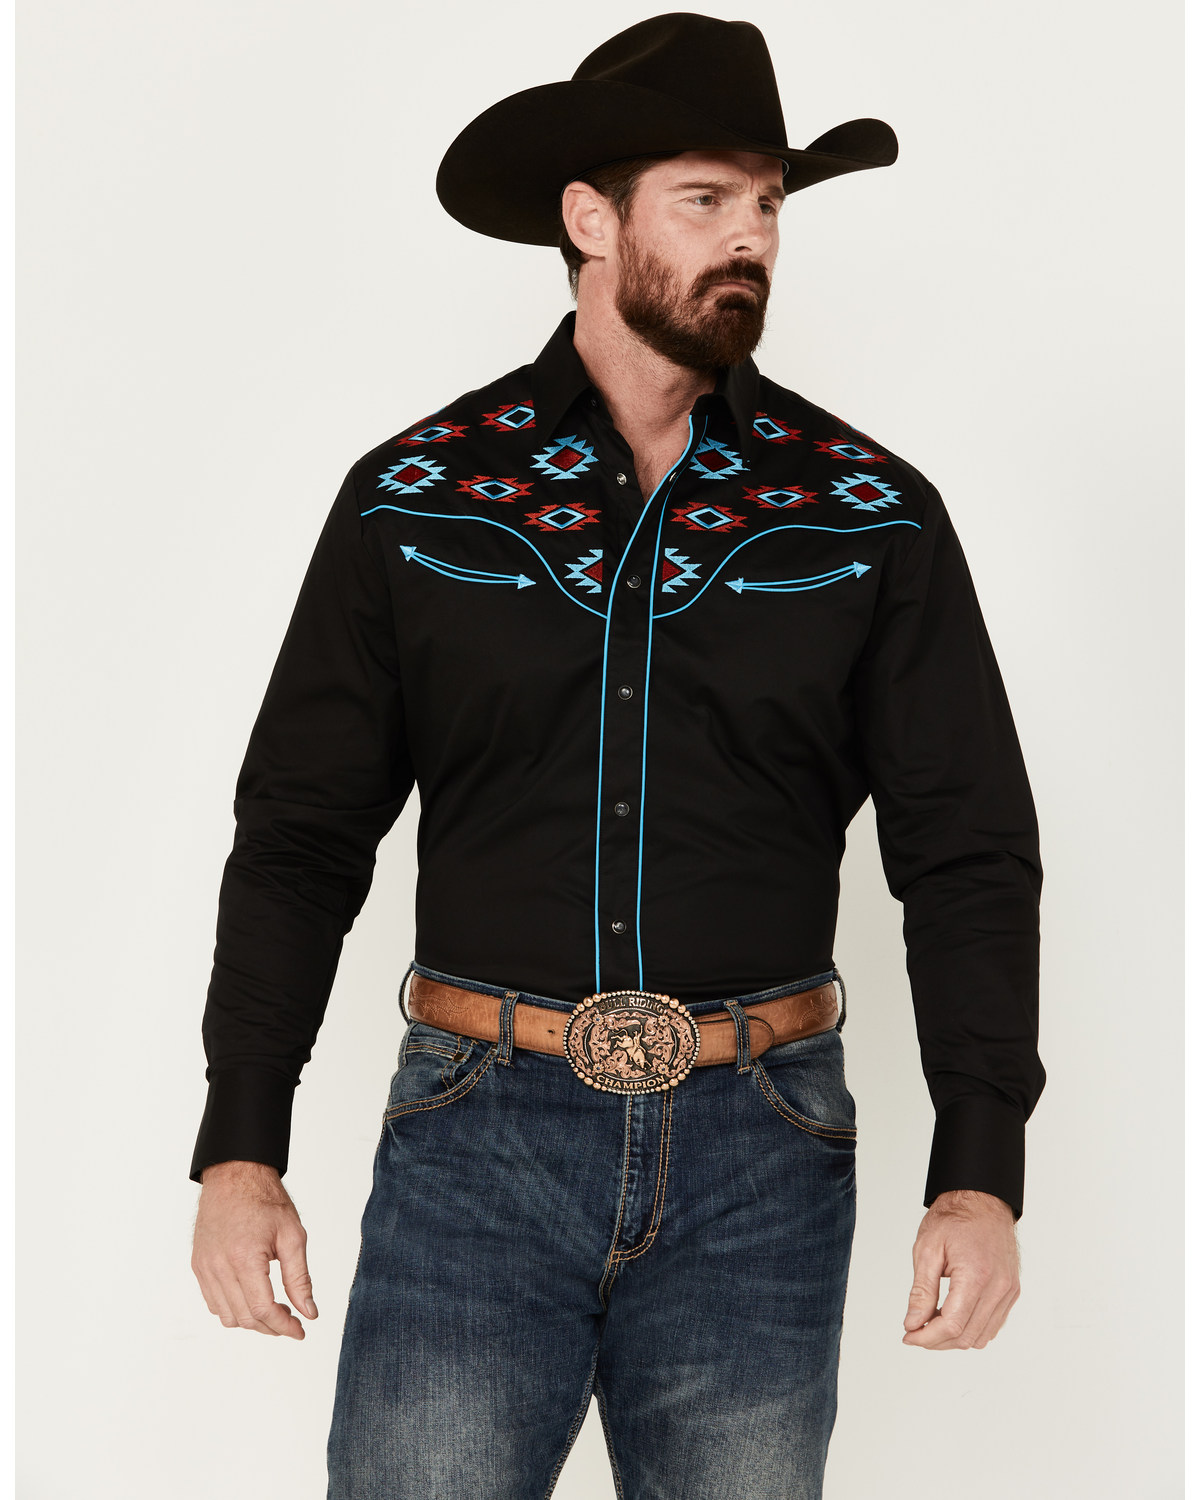 Rodeo Clothing Men's Fancy Smiley Yoke Embroidered Long Sleeve Snap Western Shirt